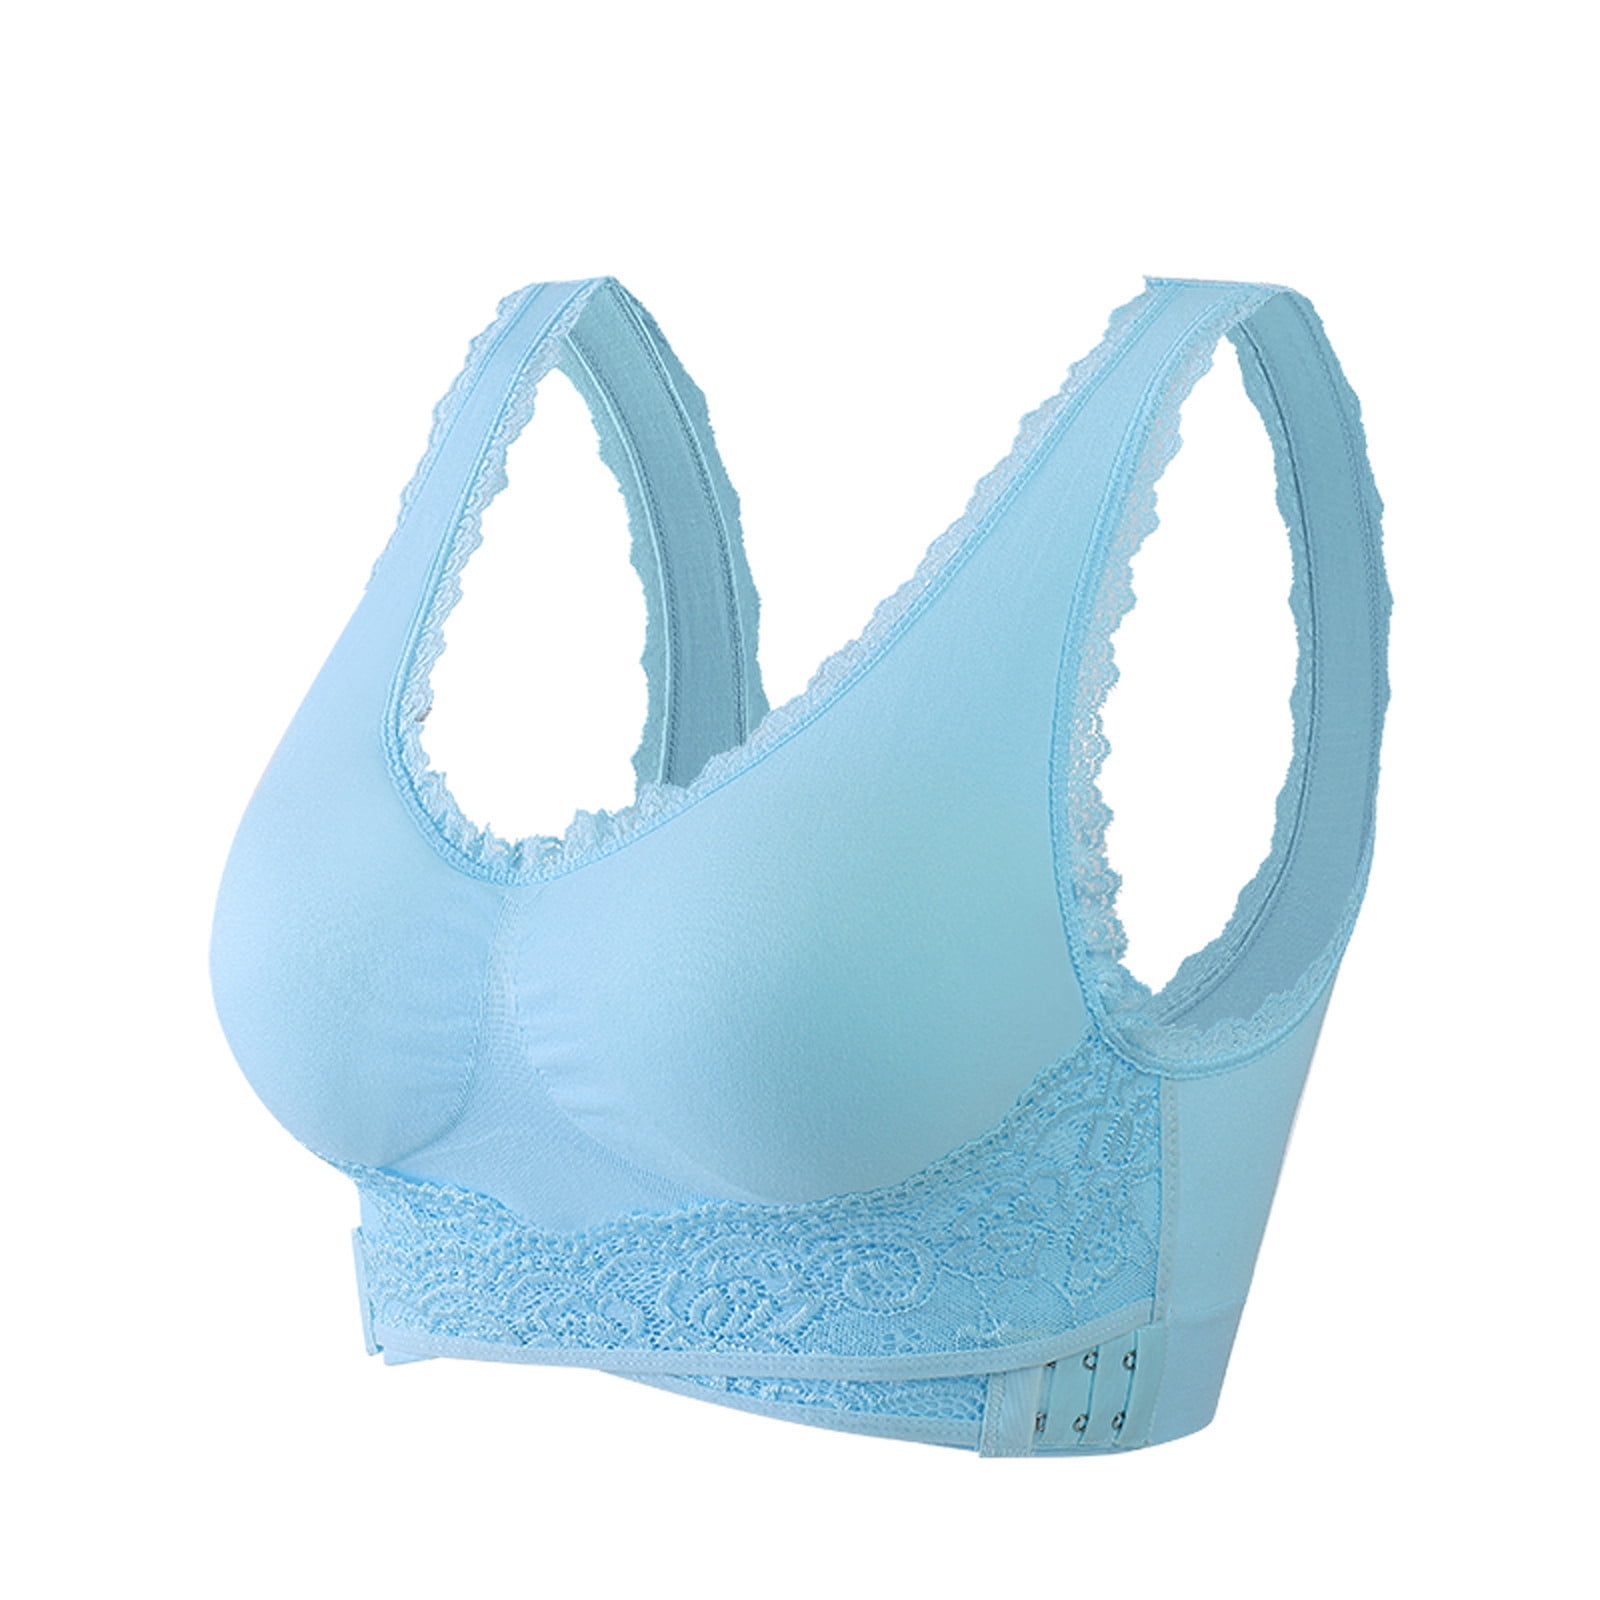 Orbescl Comfort Bras for Women Cross Front Push Up Wireless Lace